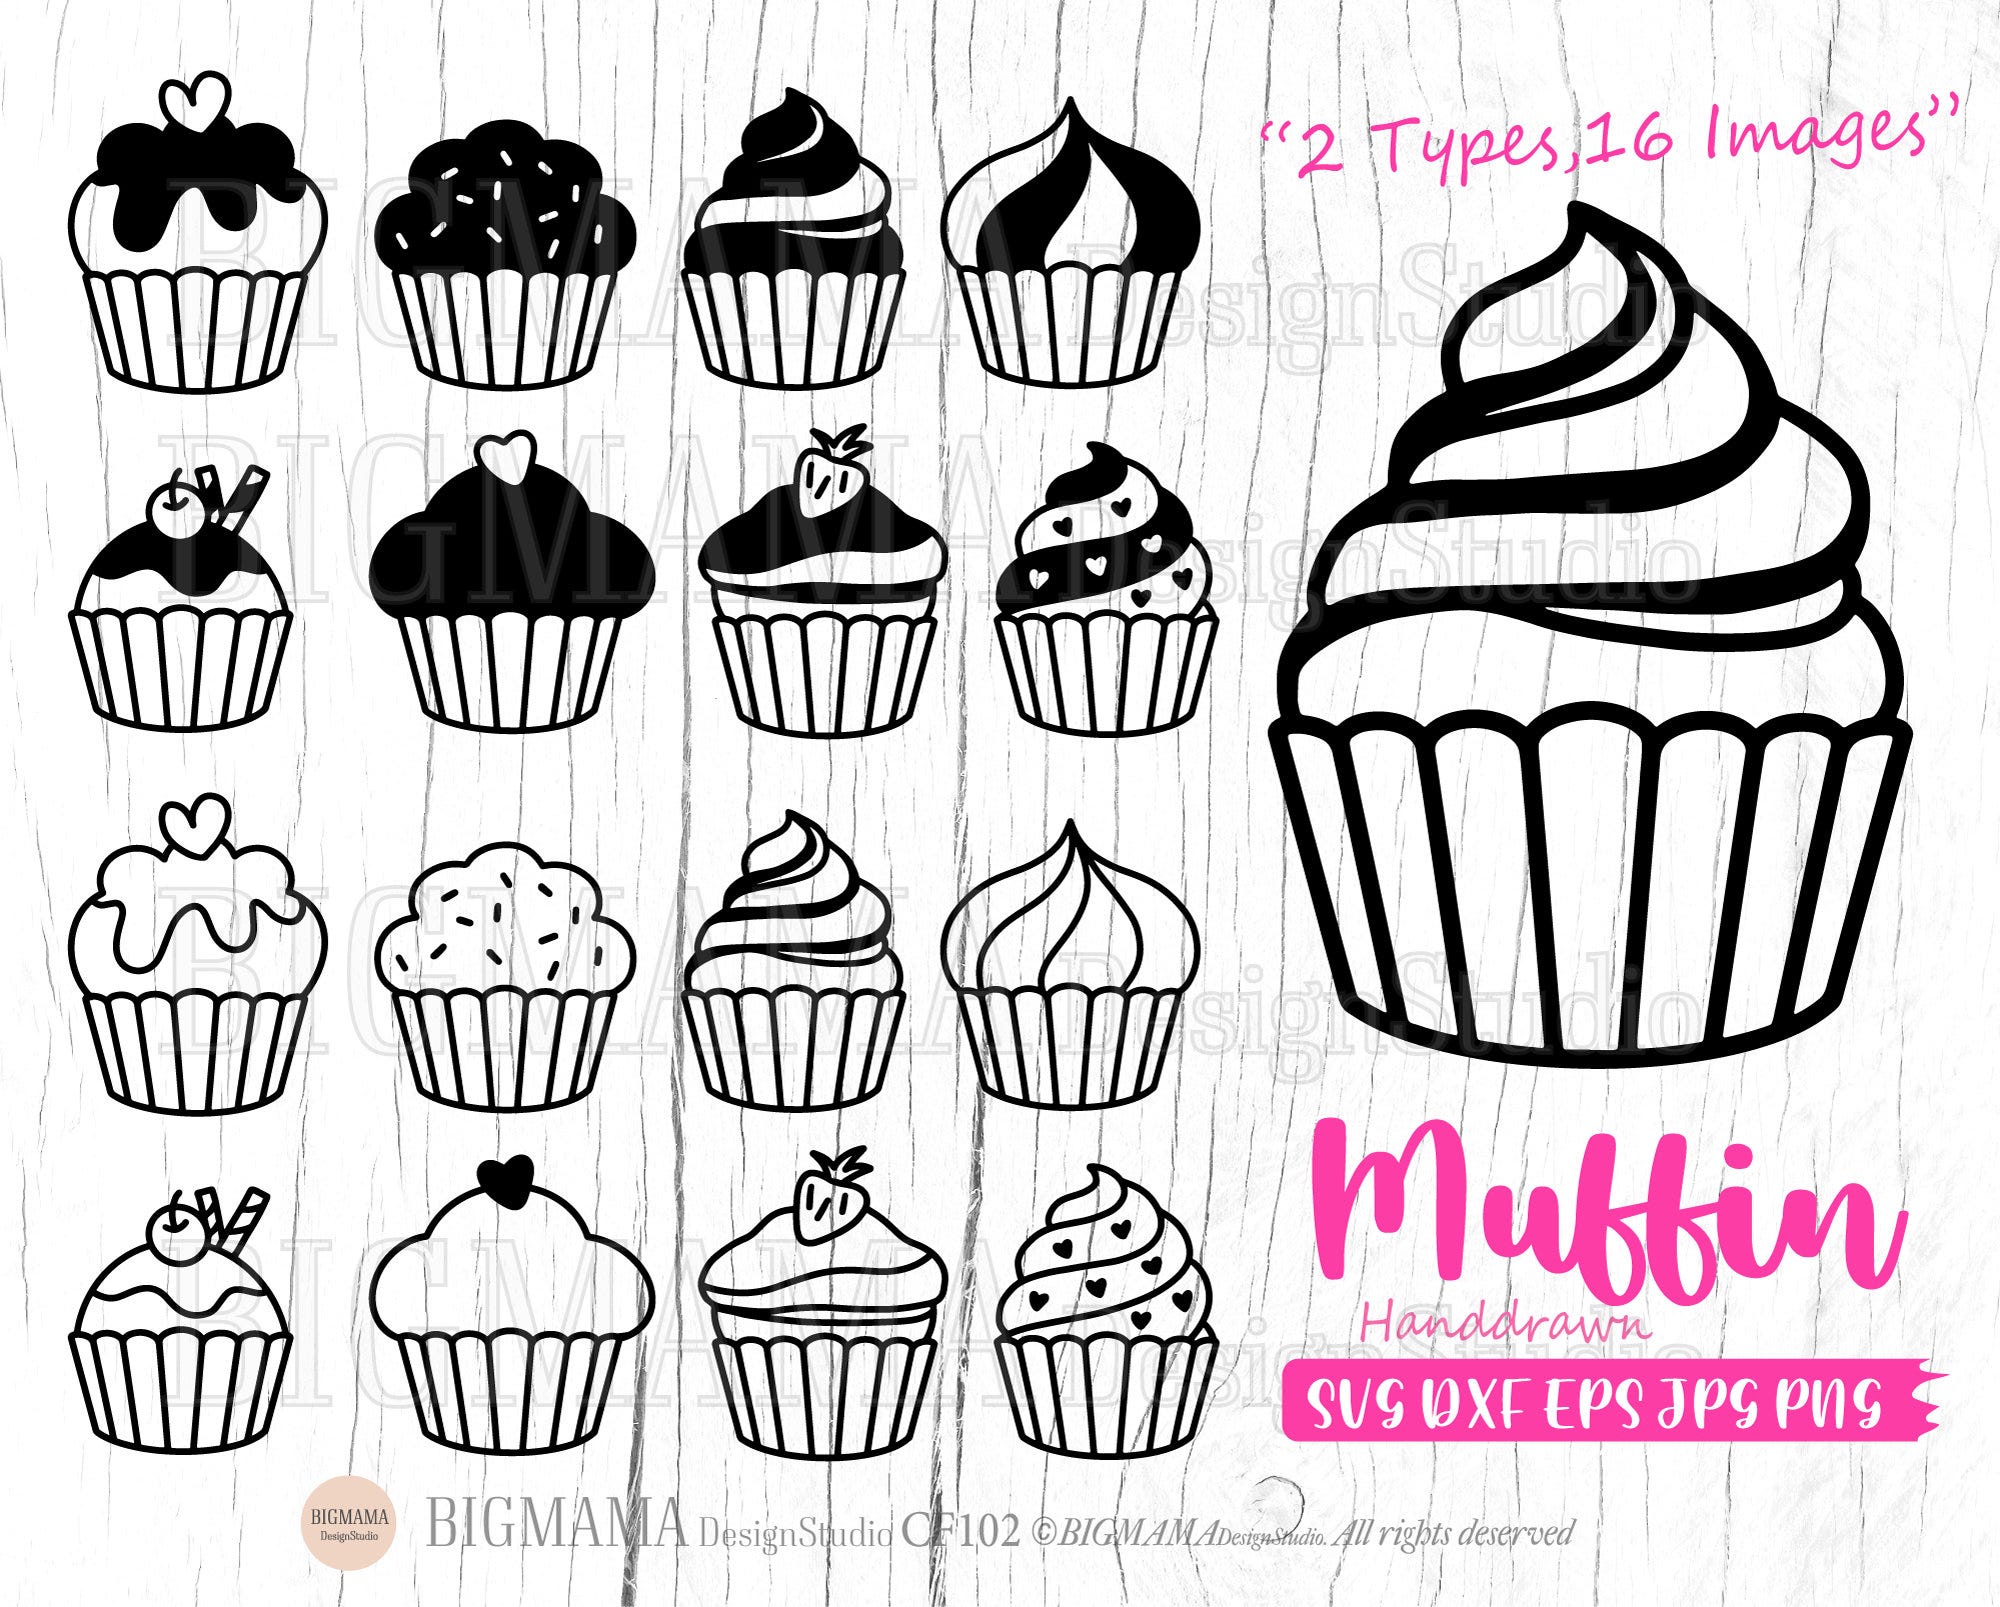 Muffin SVG,Cup Cake,DXF,Muffin Cut File,Bakery,Birthday,Dessert,Sweets,Cricut,Silhouette,Commercial use,Instant download_CF102